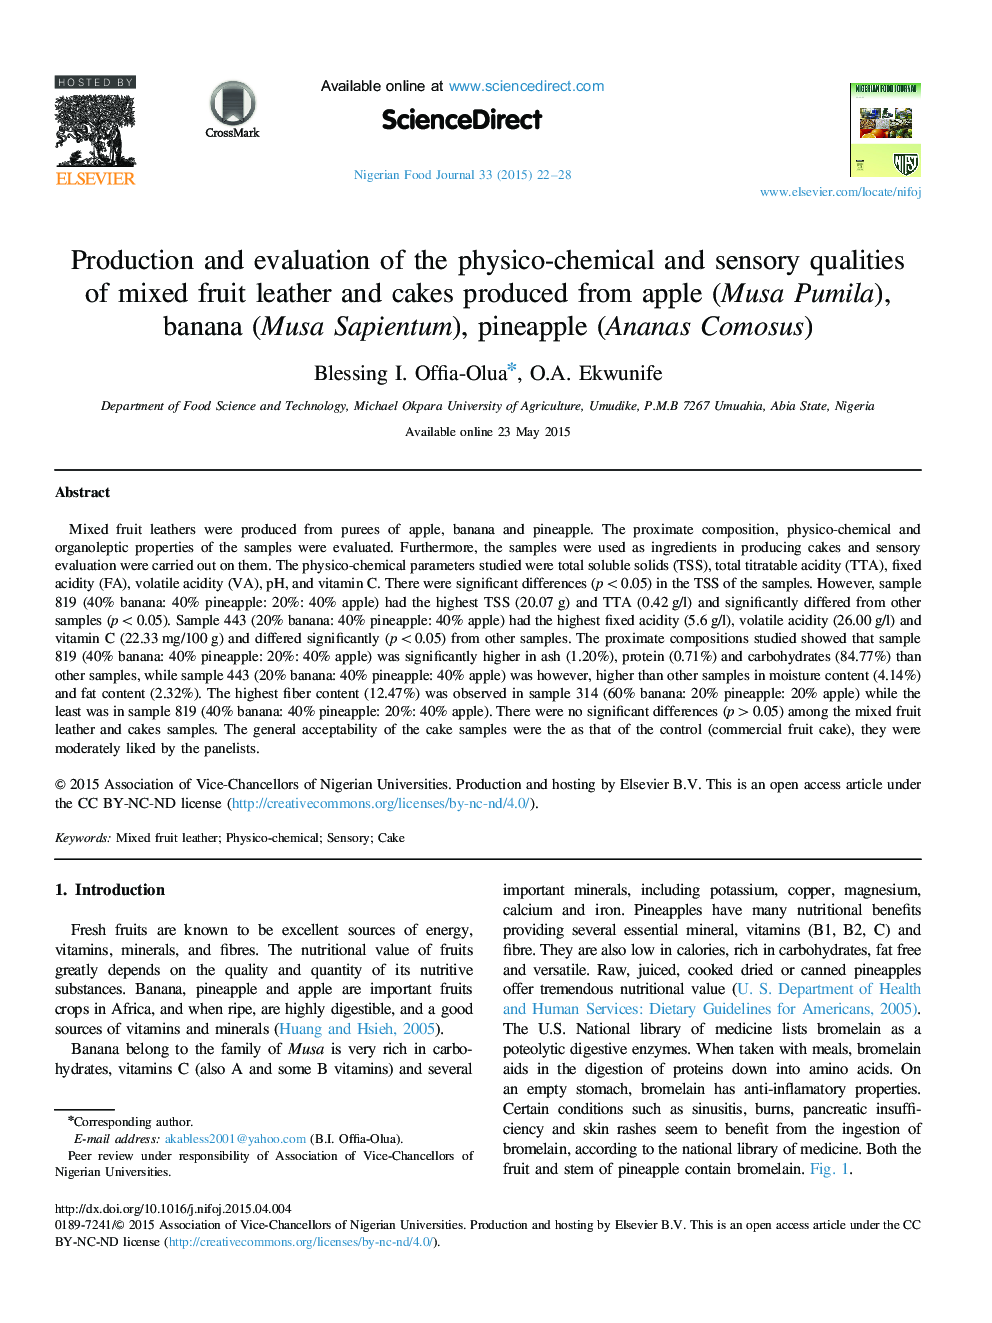 Production and evaluation of the physico-chemical and sensory qualities of mixed fruit leather and cakes produced from apple (Musa Pumila), banana (Musa Sapientum), pineapple (Ananas Comosus) 